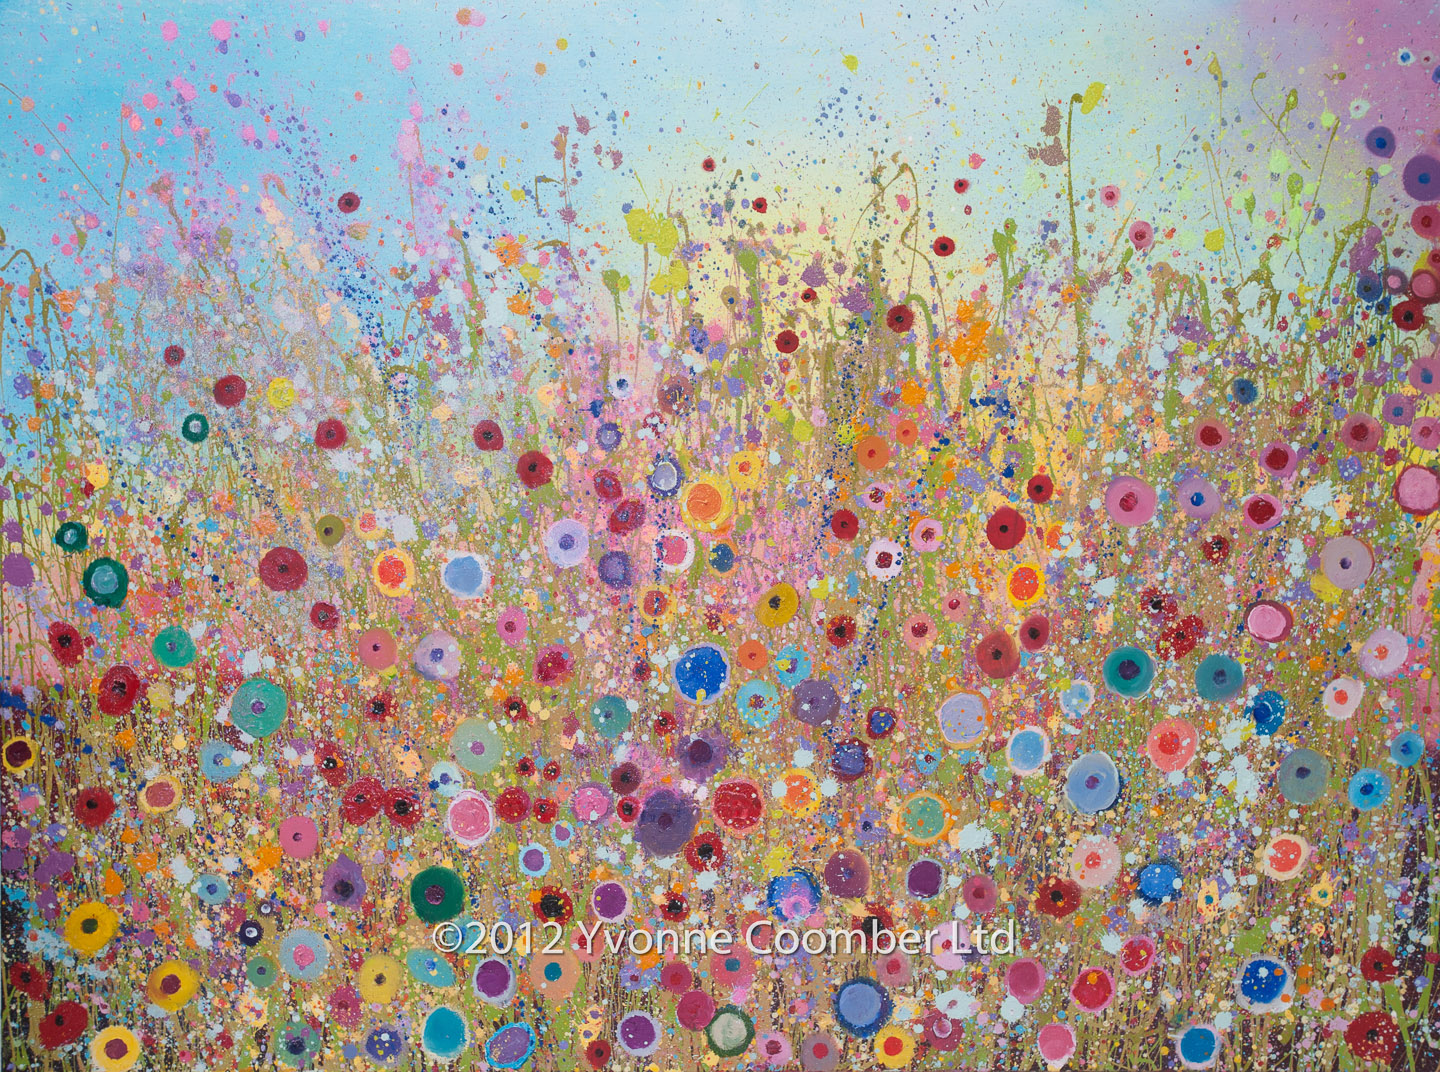 Yvonne Coomber at Imagianation Gallery - St Ives, Cornwall - Art of ...